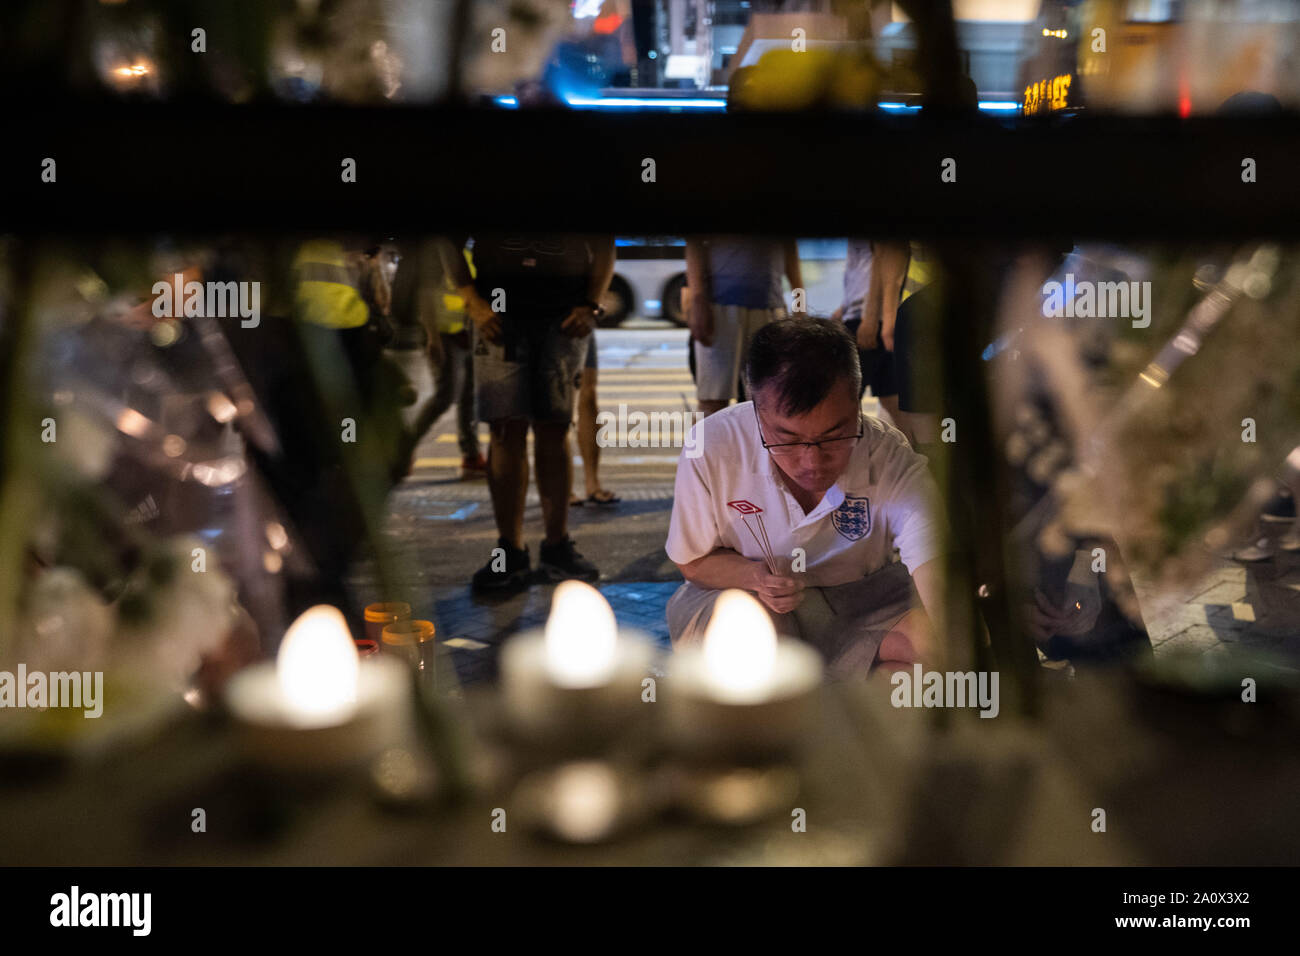 A man lights a candle to pay tribute to those who lost their lives in Prince Edward station on 31st August.Pro-democracy protesters have continued demonstrations across Hong Kong, calling for the city's Chief Executive Carrie Lam to immediately meet the rest of their demands, including an independent inquiry into police brutality, the retraction of the word “riot” to describe the rallies, and genuine universal suffrage, as the territory faces a leadership crisis. Stock Photo